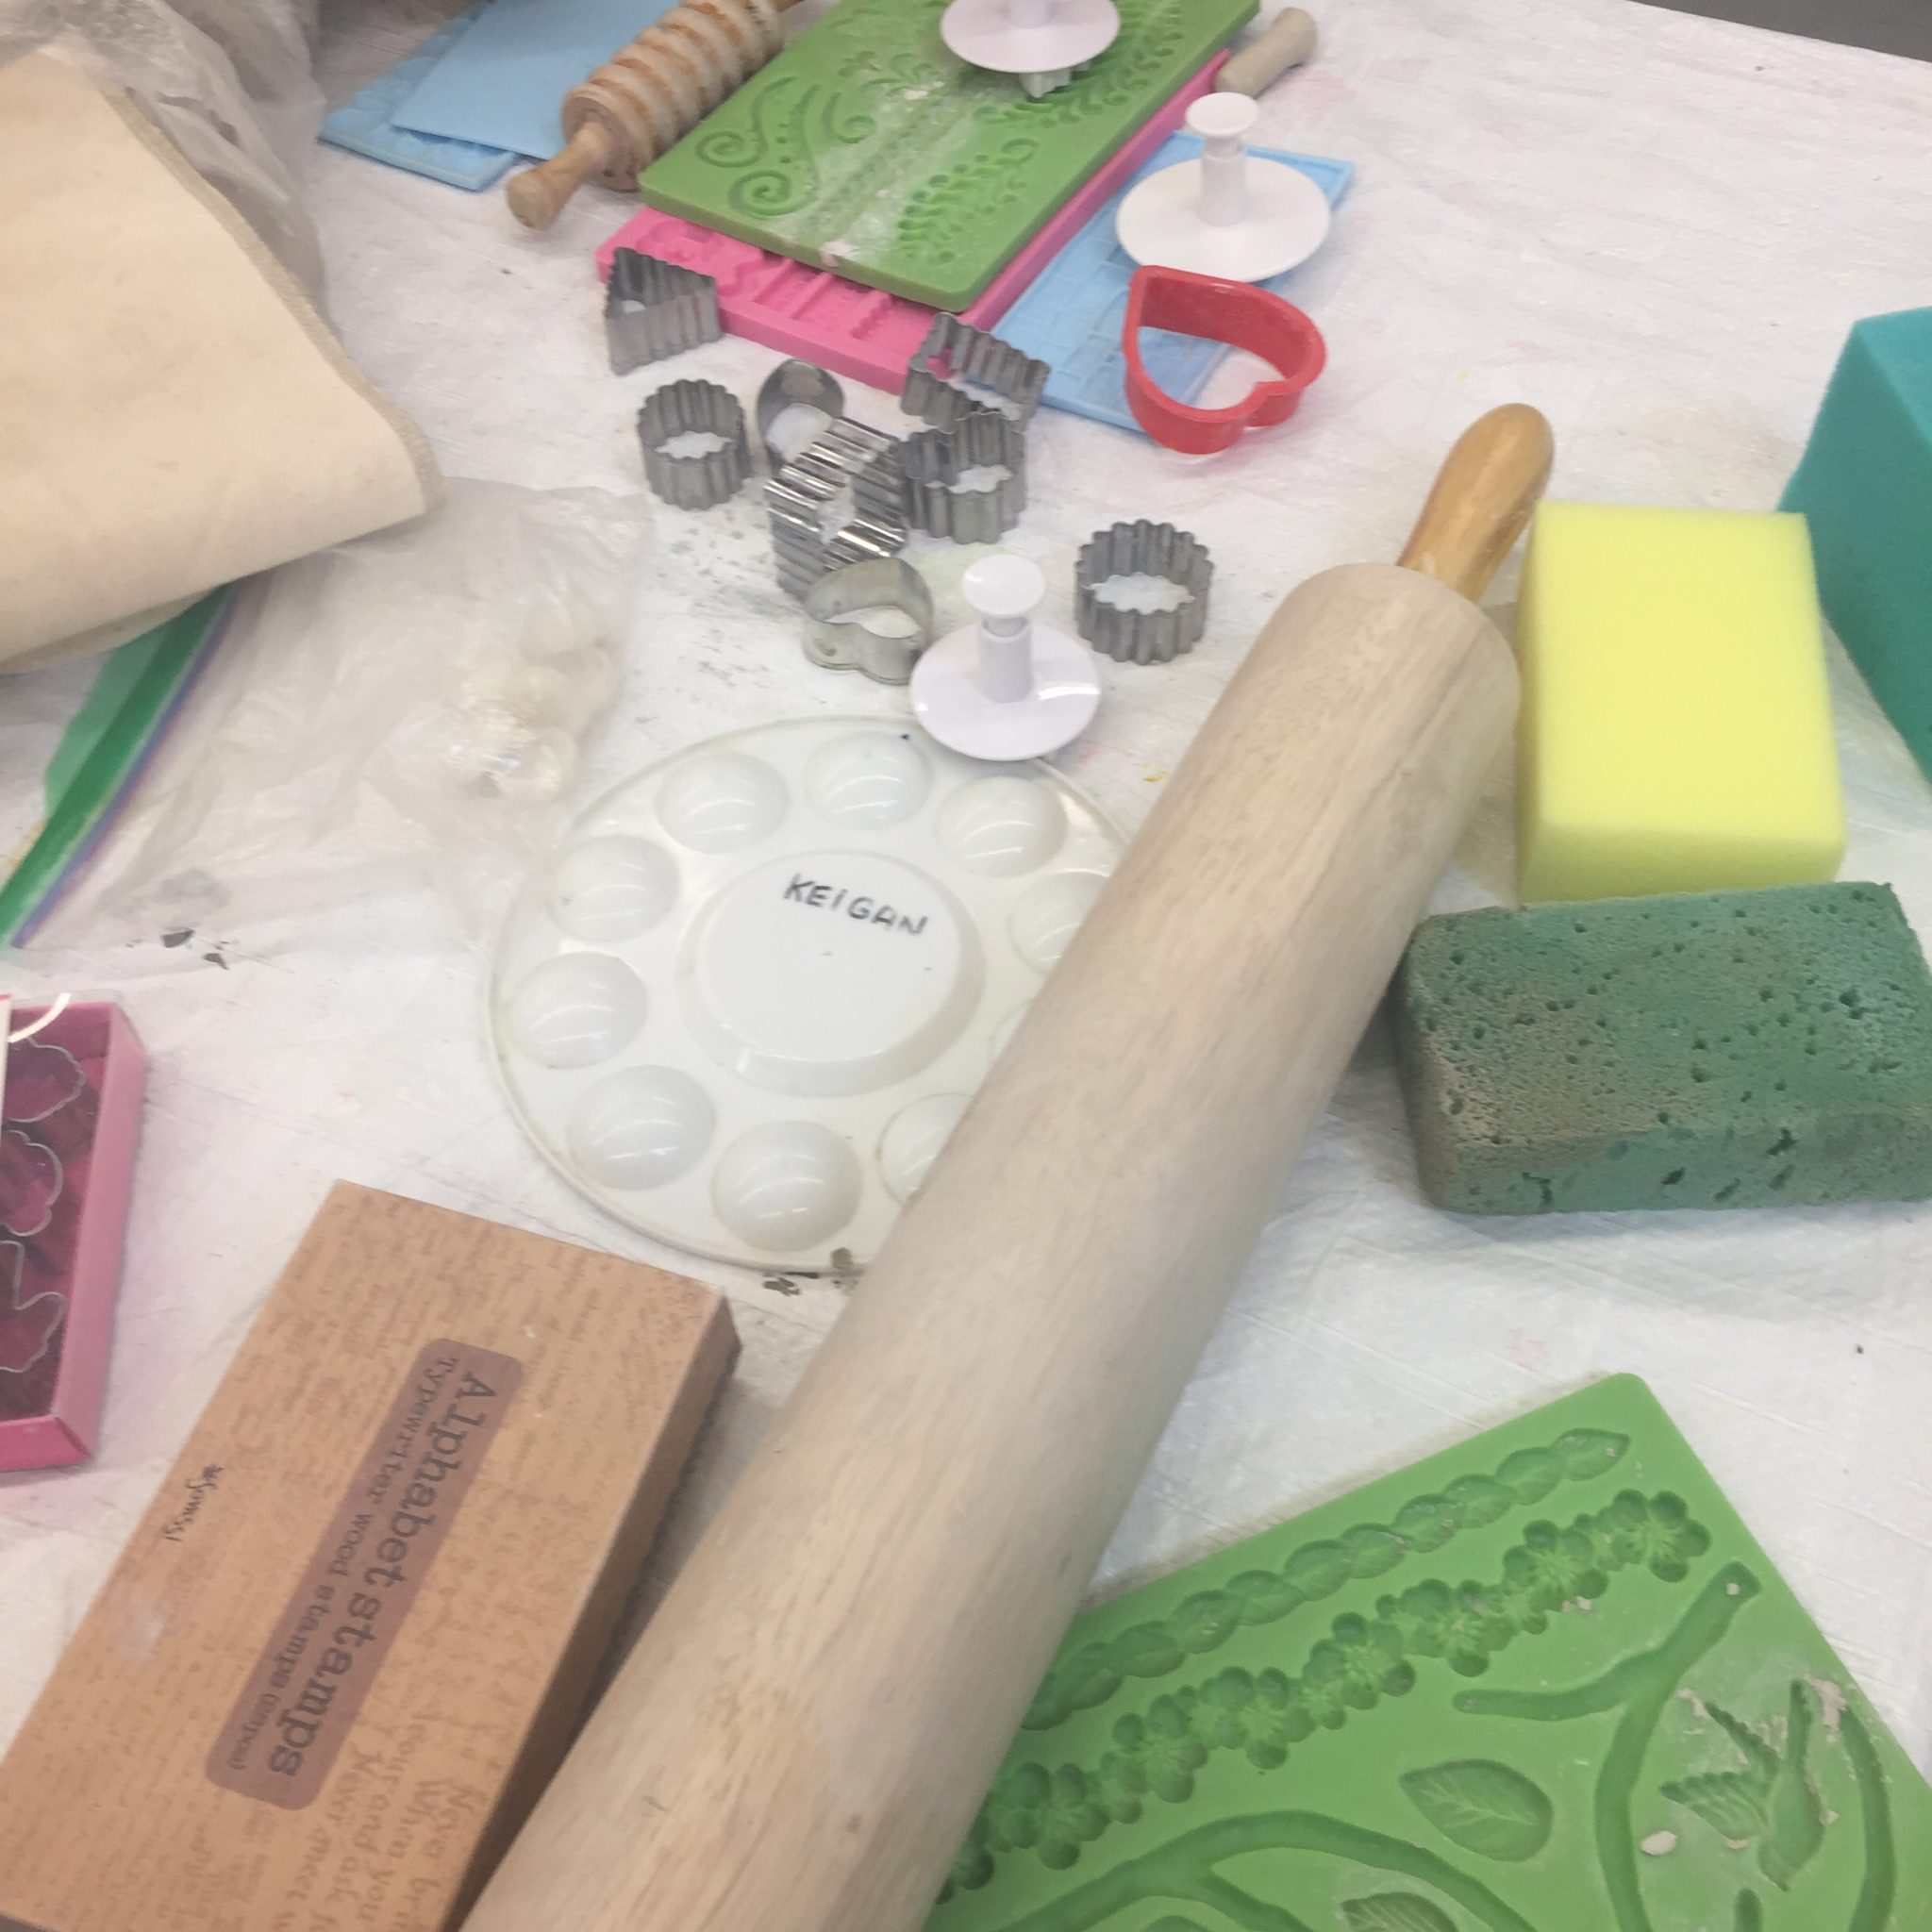 Vernon Community Arts Centre - Elf & Mushroom Sculpture with Air Dry Clay: Ages 13-17